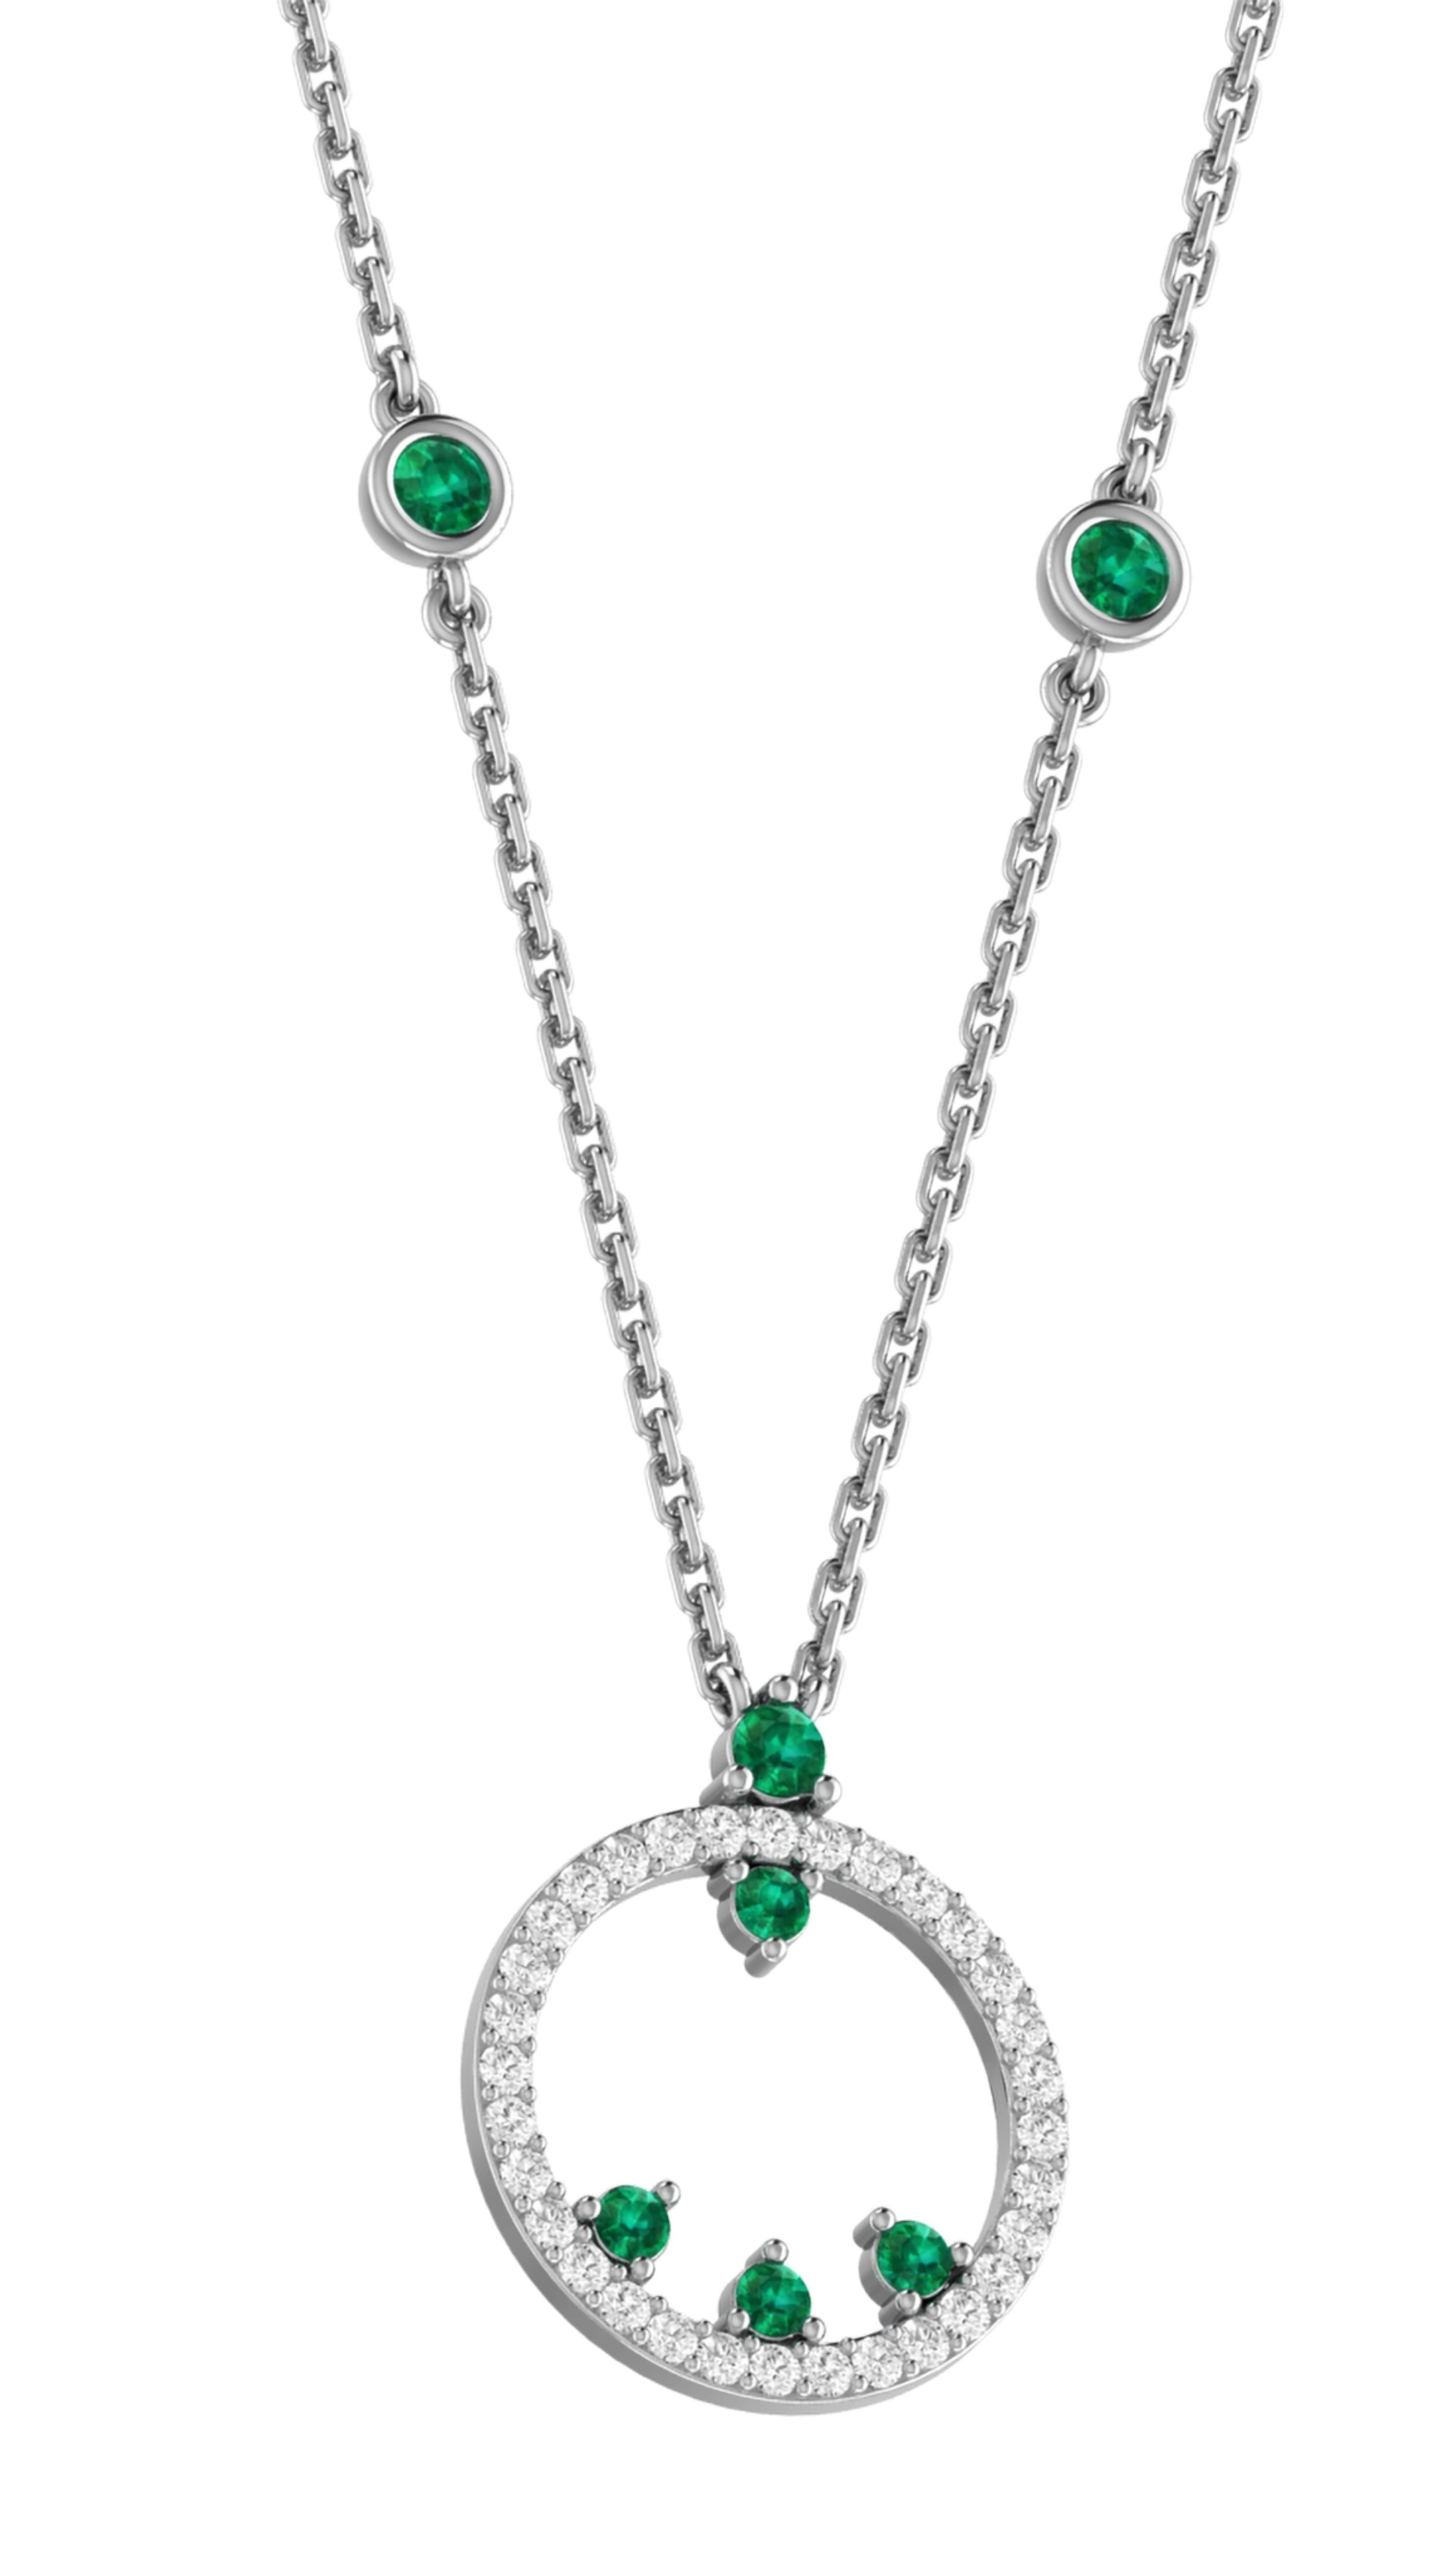 Conde de diamante Minimal Esmeralda Pendant Necklace 18K white gold, art deco-inspired circle design with paved diamond stones and emerald detailing. The 18K white gold chain is accented with emerald links.